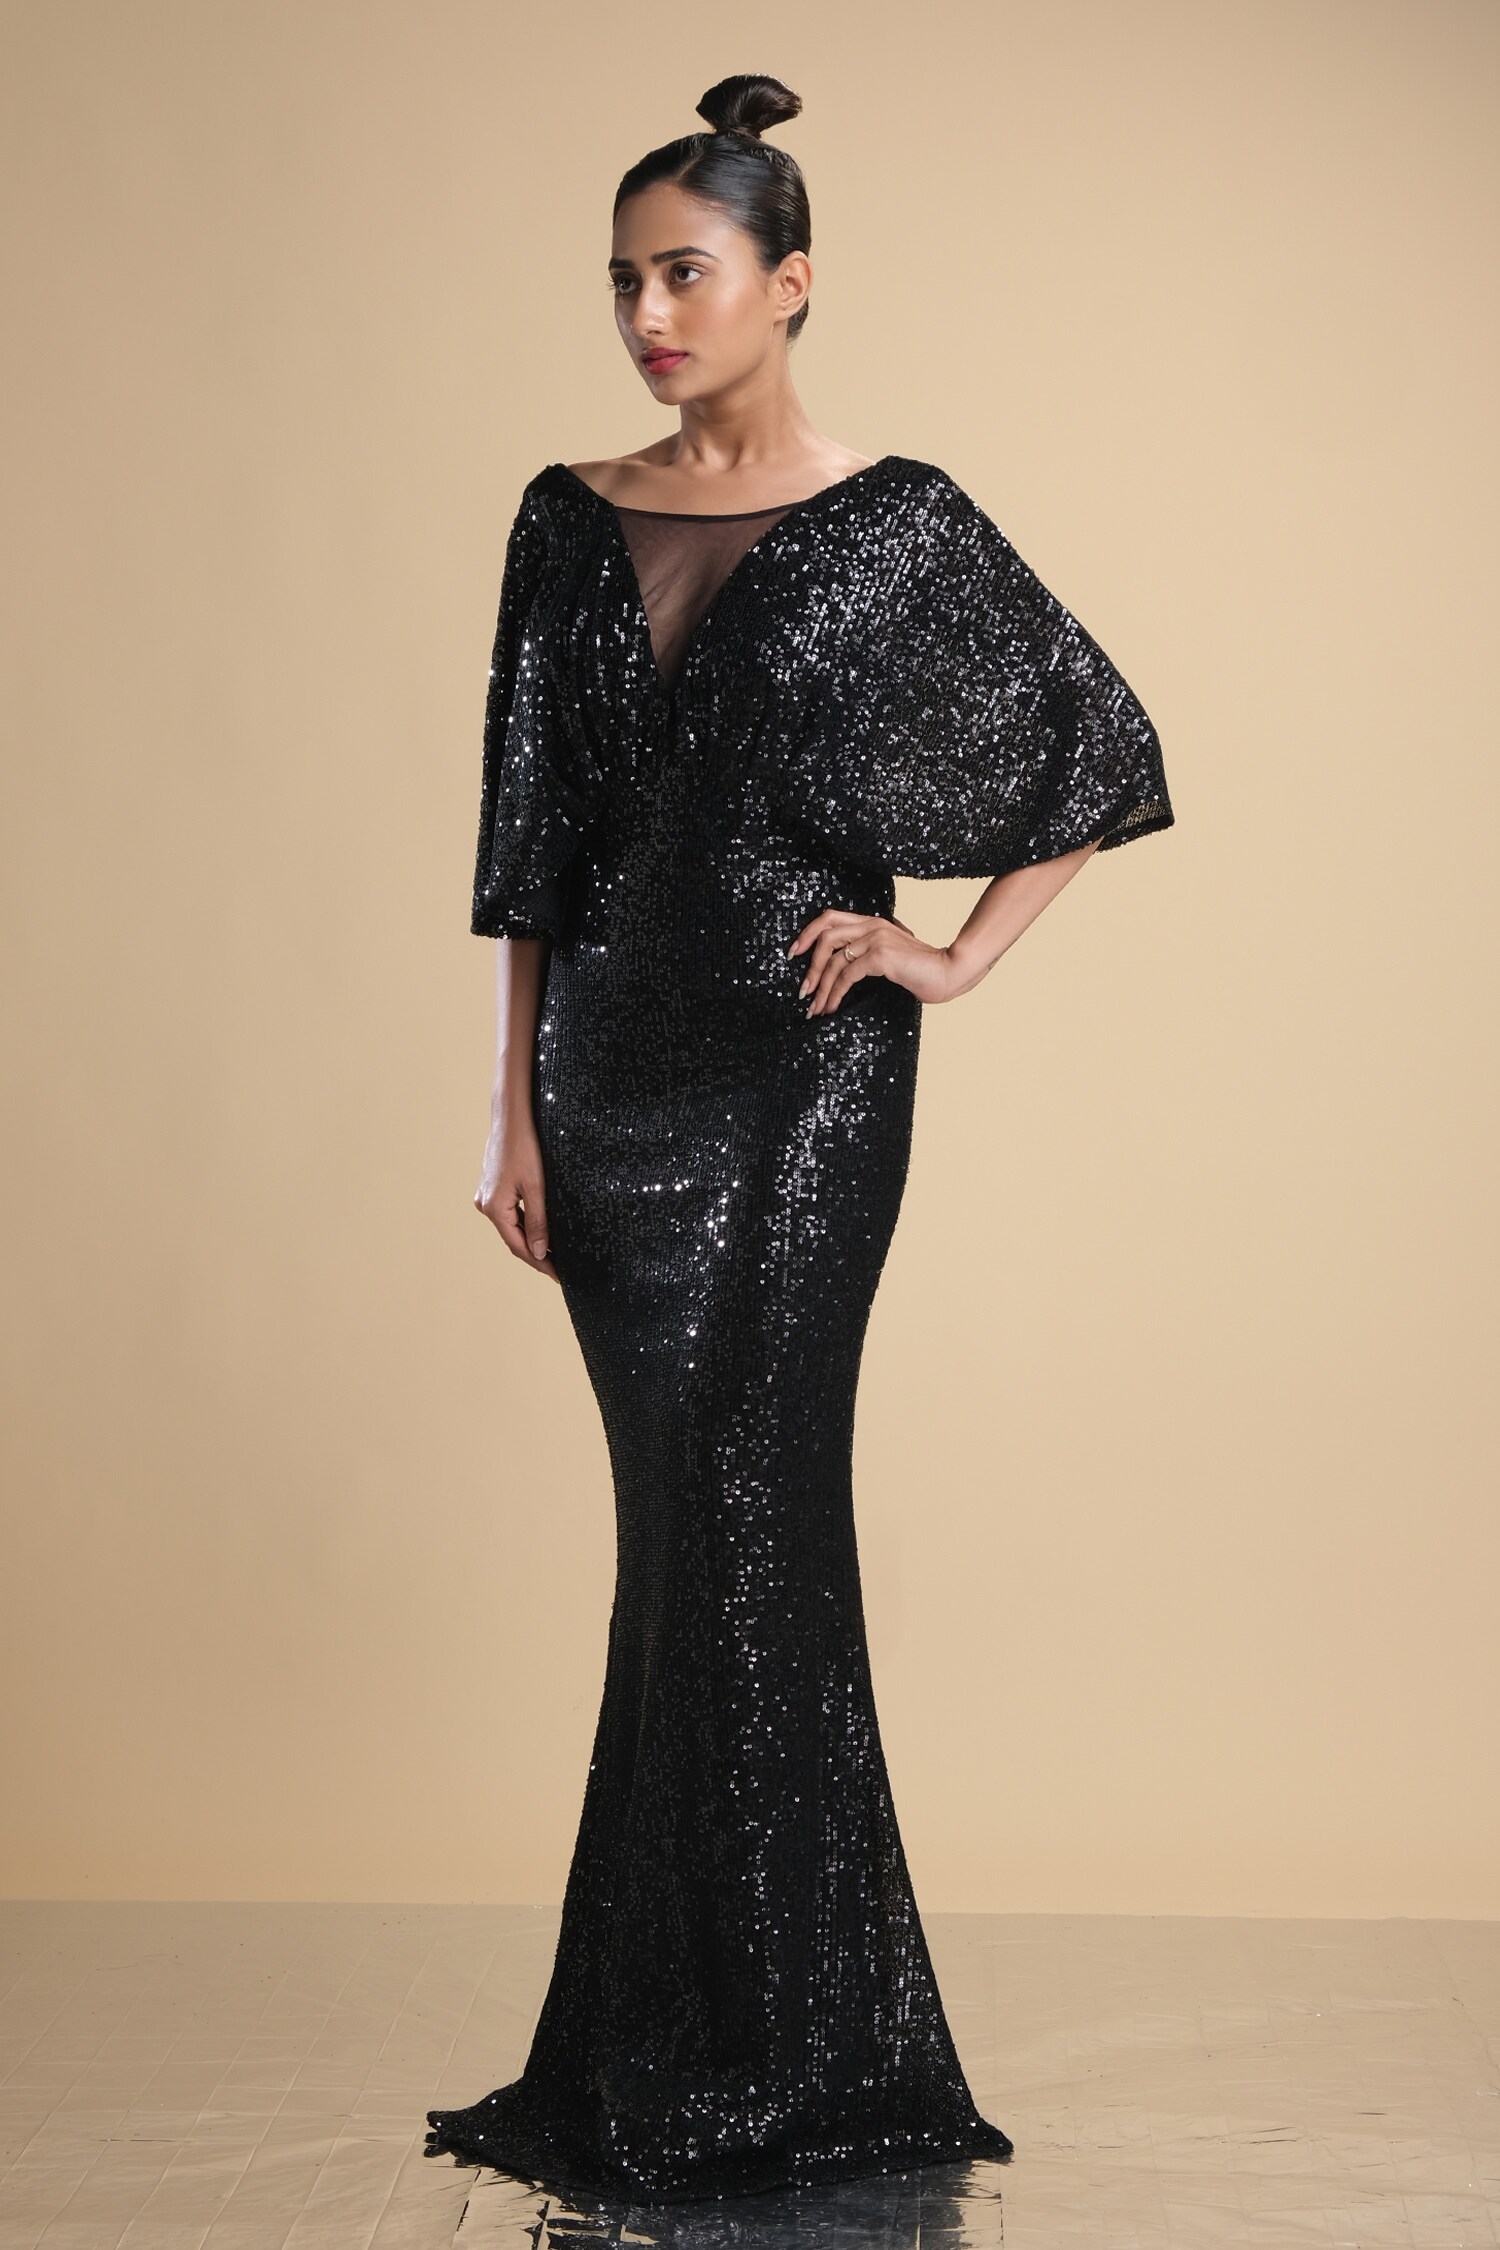 Black Sequin Dress  Embroidered Dress  LaceUp Maxi Dress  Lulus